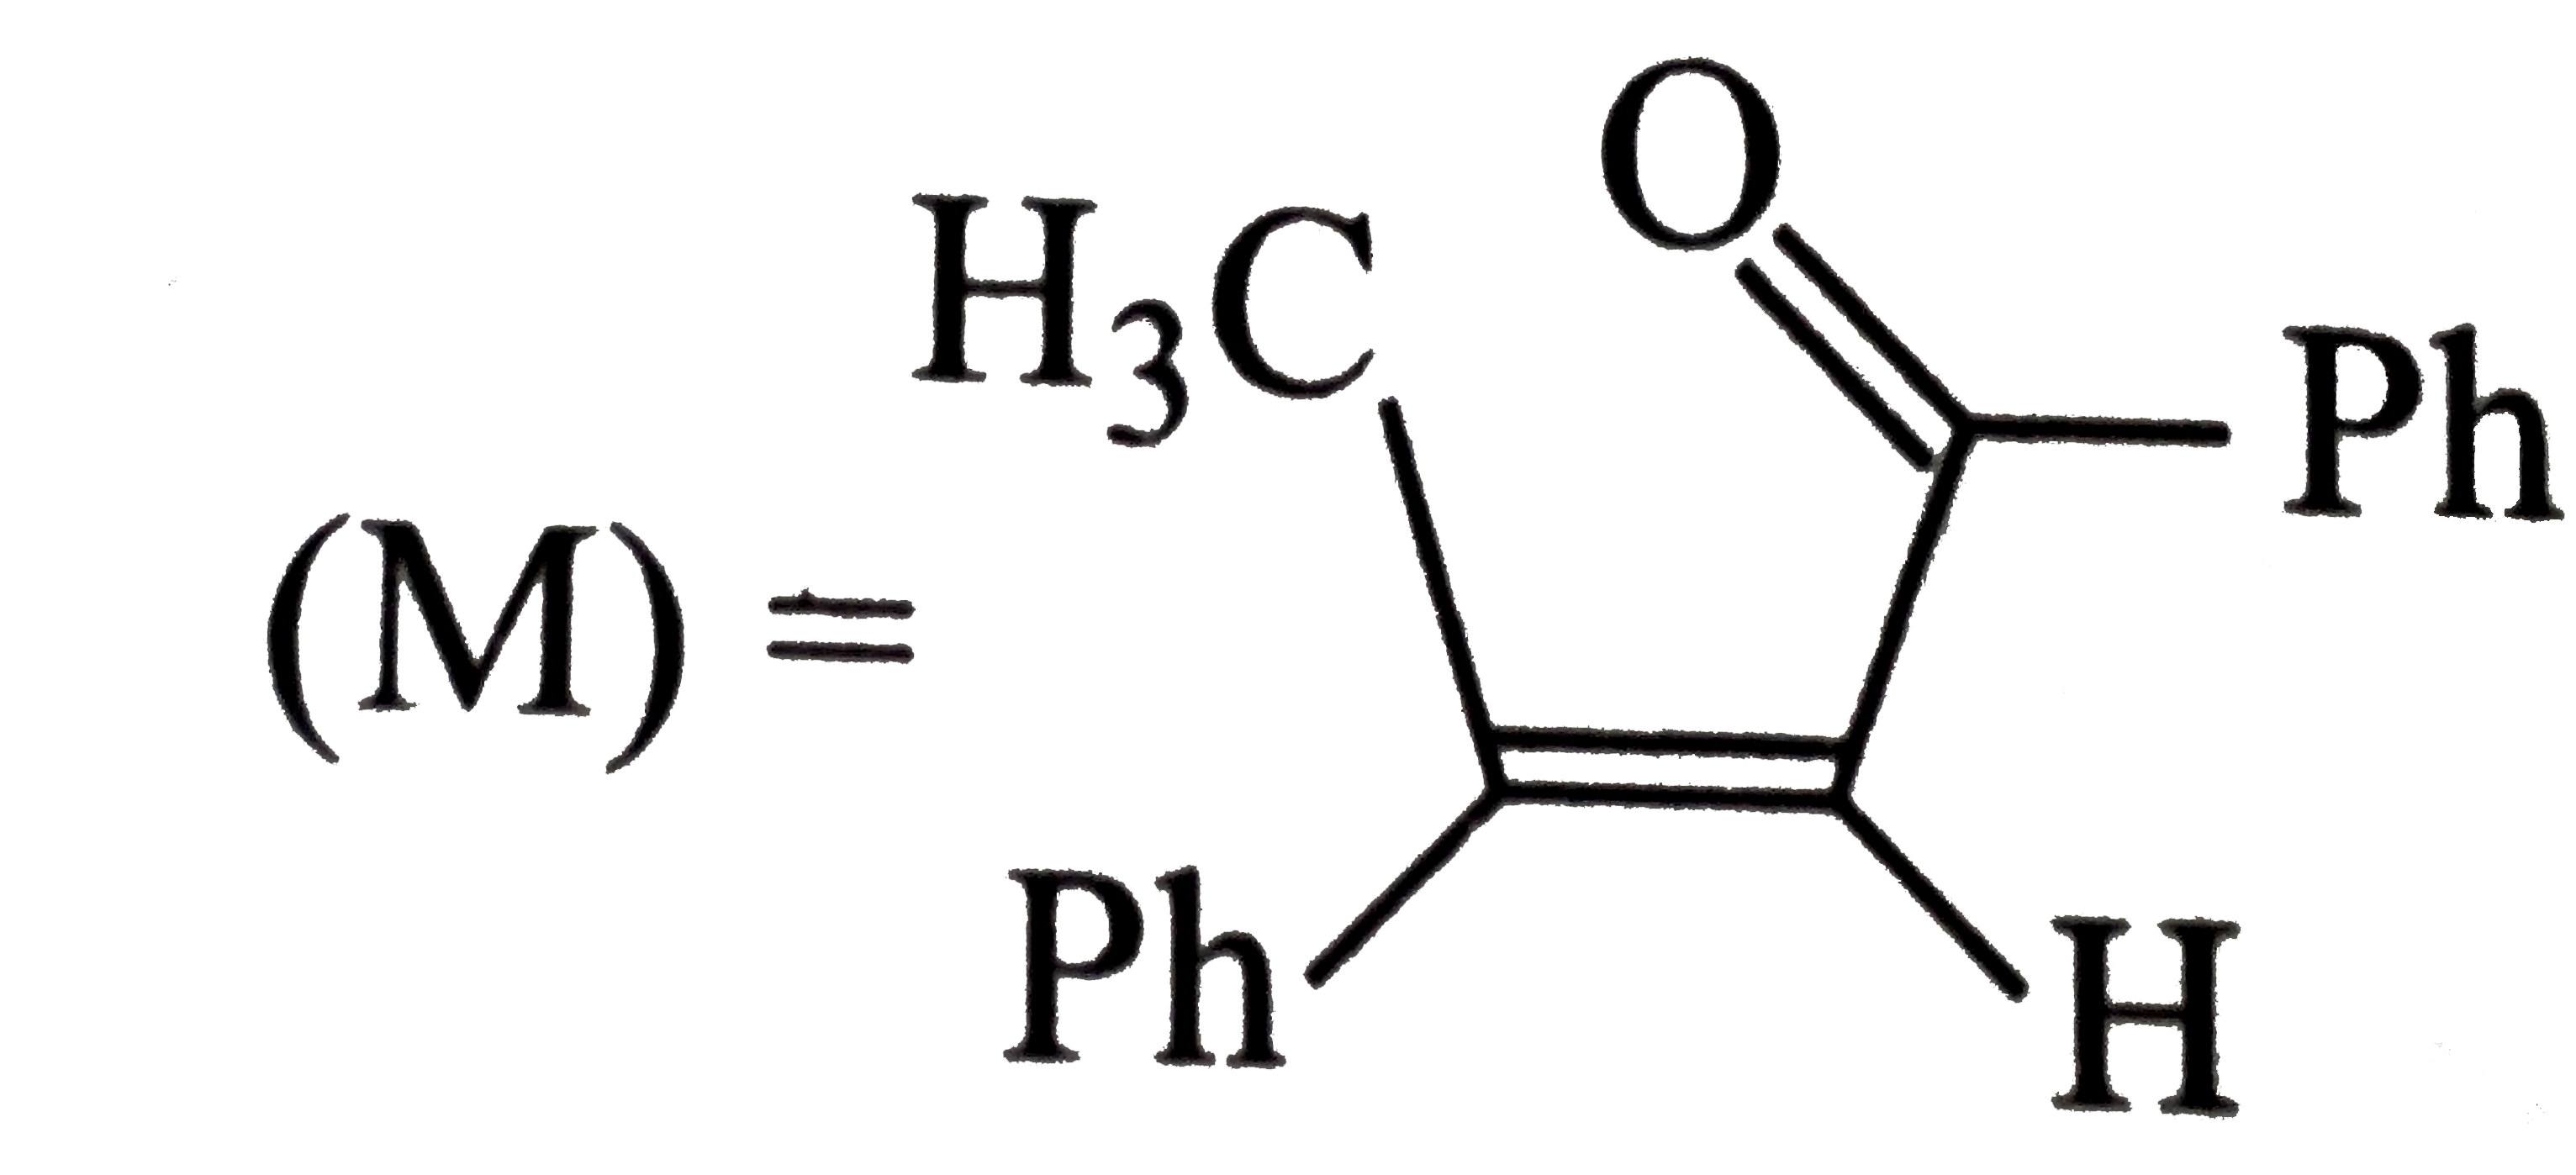 A tertiary alcohol (H) upon acid-catalysed dehydration gives a product (I). Ozonolysis of (I) leads to compounds (J) and (K). Compound (J) upon reaction with KOH gives benzyl alcohol and a compound (L), whereas (K) on reaction with KOH gives only (M).      The structurer of compound (I) is: